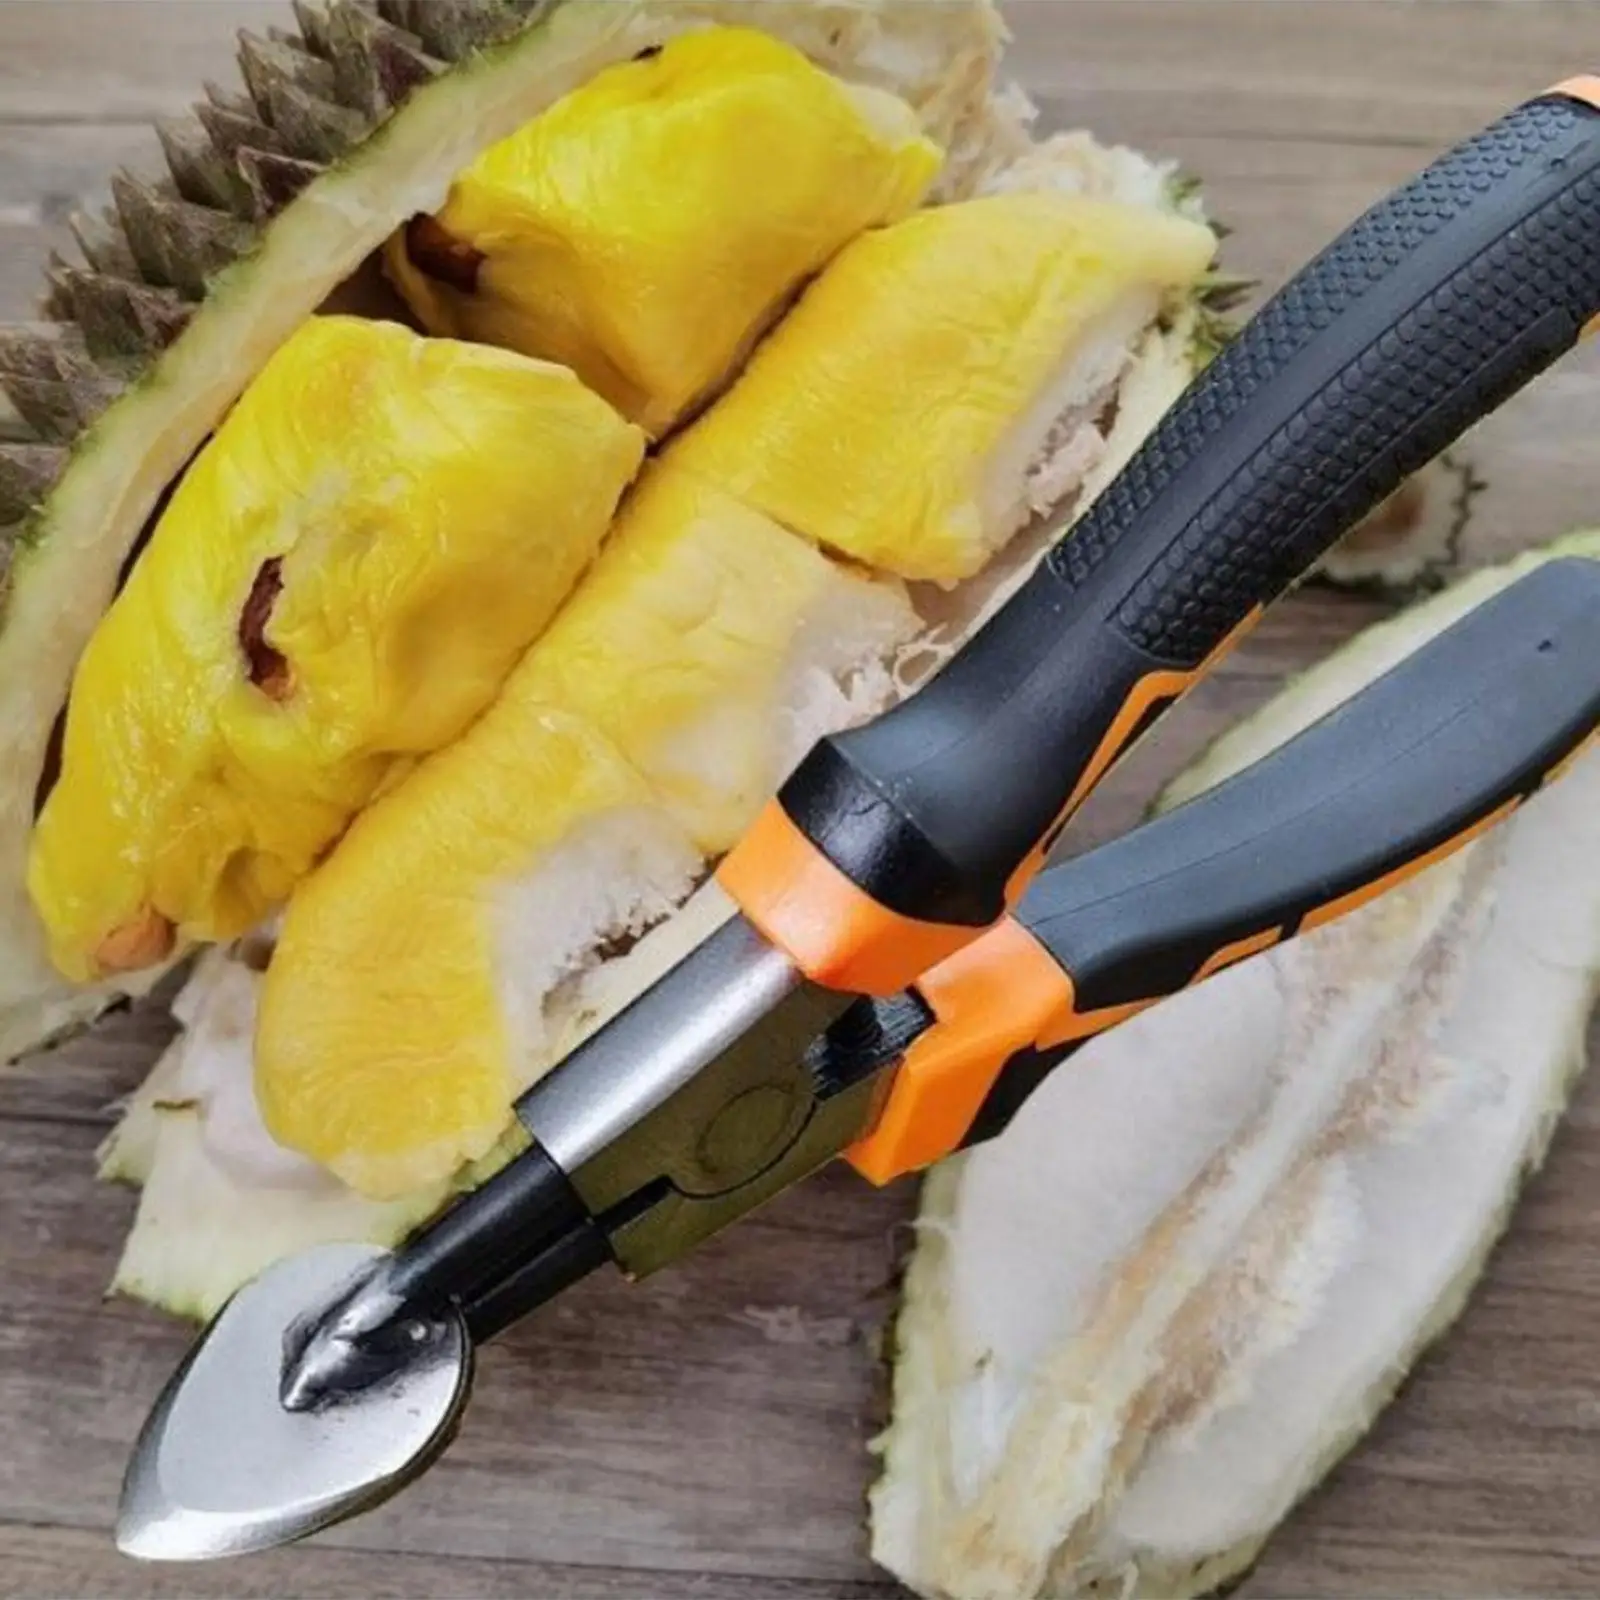 Durian Opener Watermelon Opener Peeling Smooth Durable Manual Durian Shelling Machine for Kids and Adults Kitchen Gadget